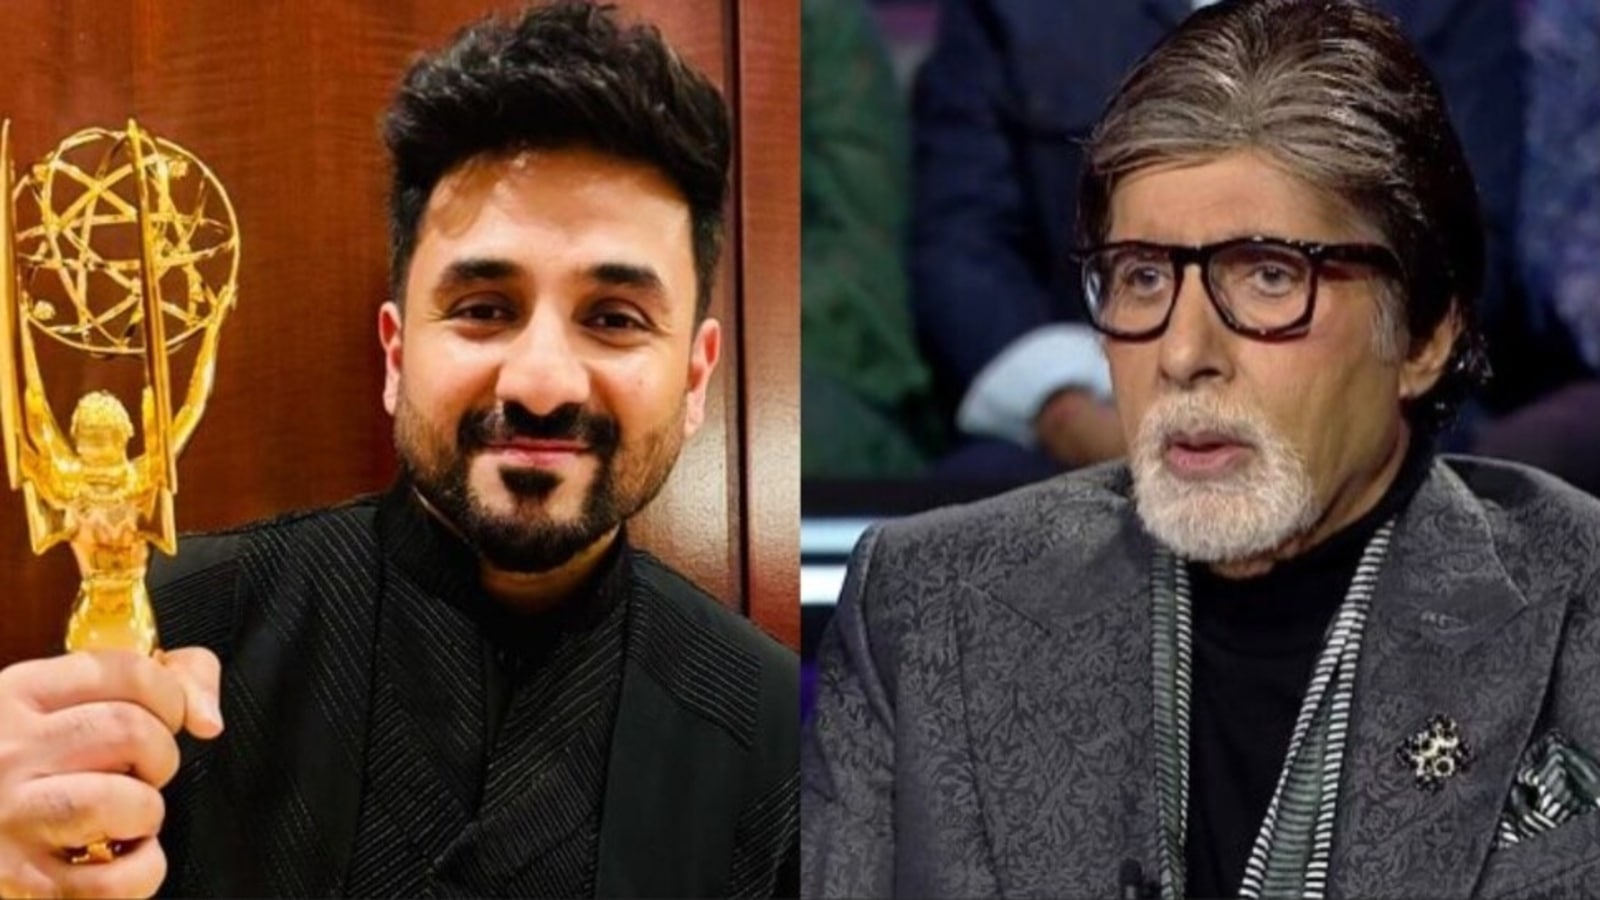 Vir shares video, reacts as Amitabh asks question about his Emmy win on KBC 15